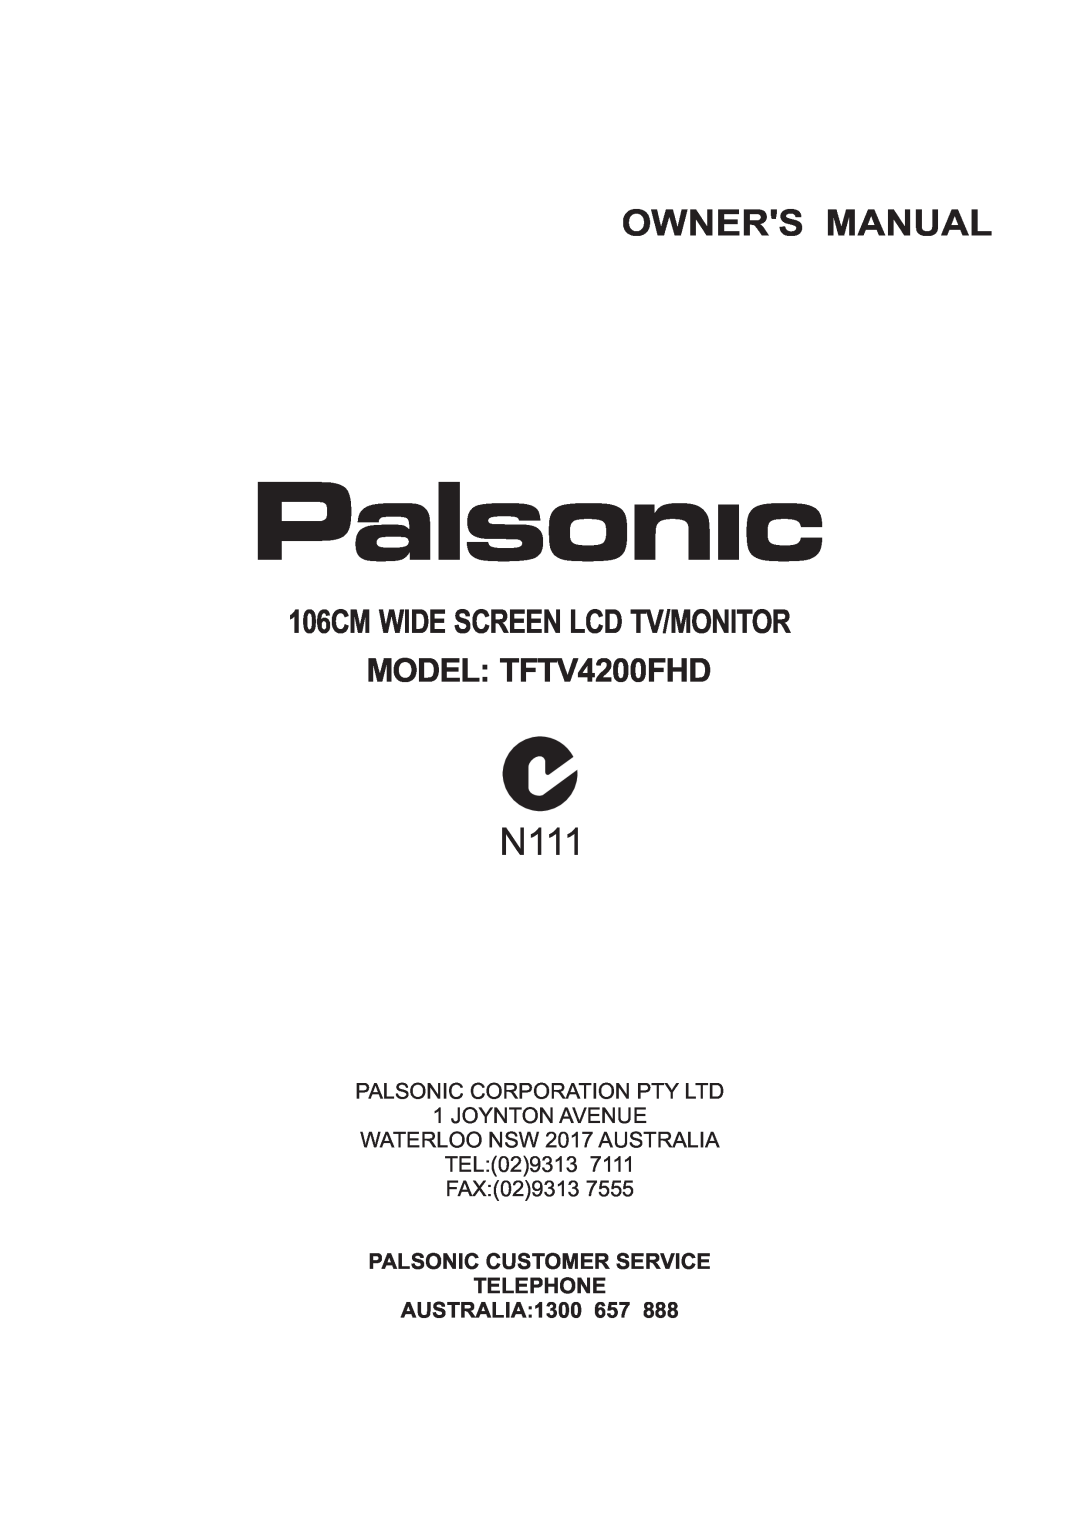 Palsonic owner manual 106CM WIDE SCREEN LCD TV/MONITOR MODEL TFTV4200FHD, N111, Owners Manual 